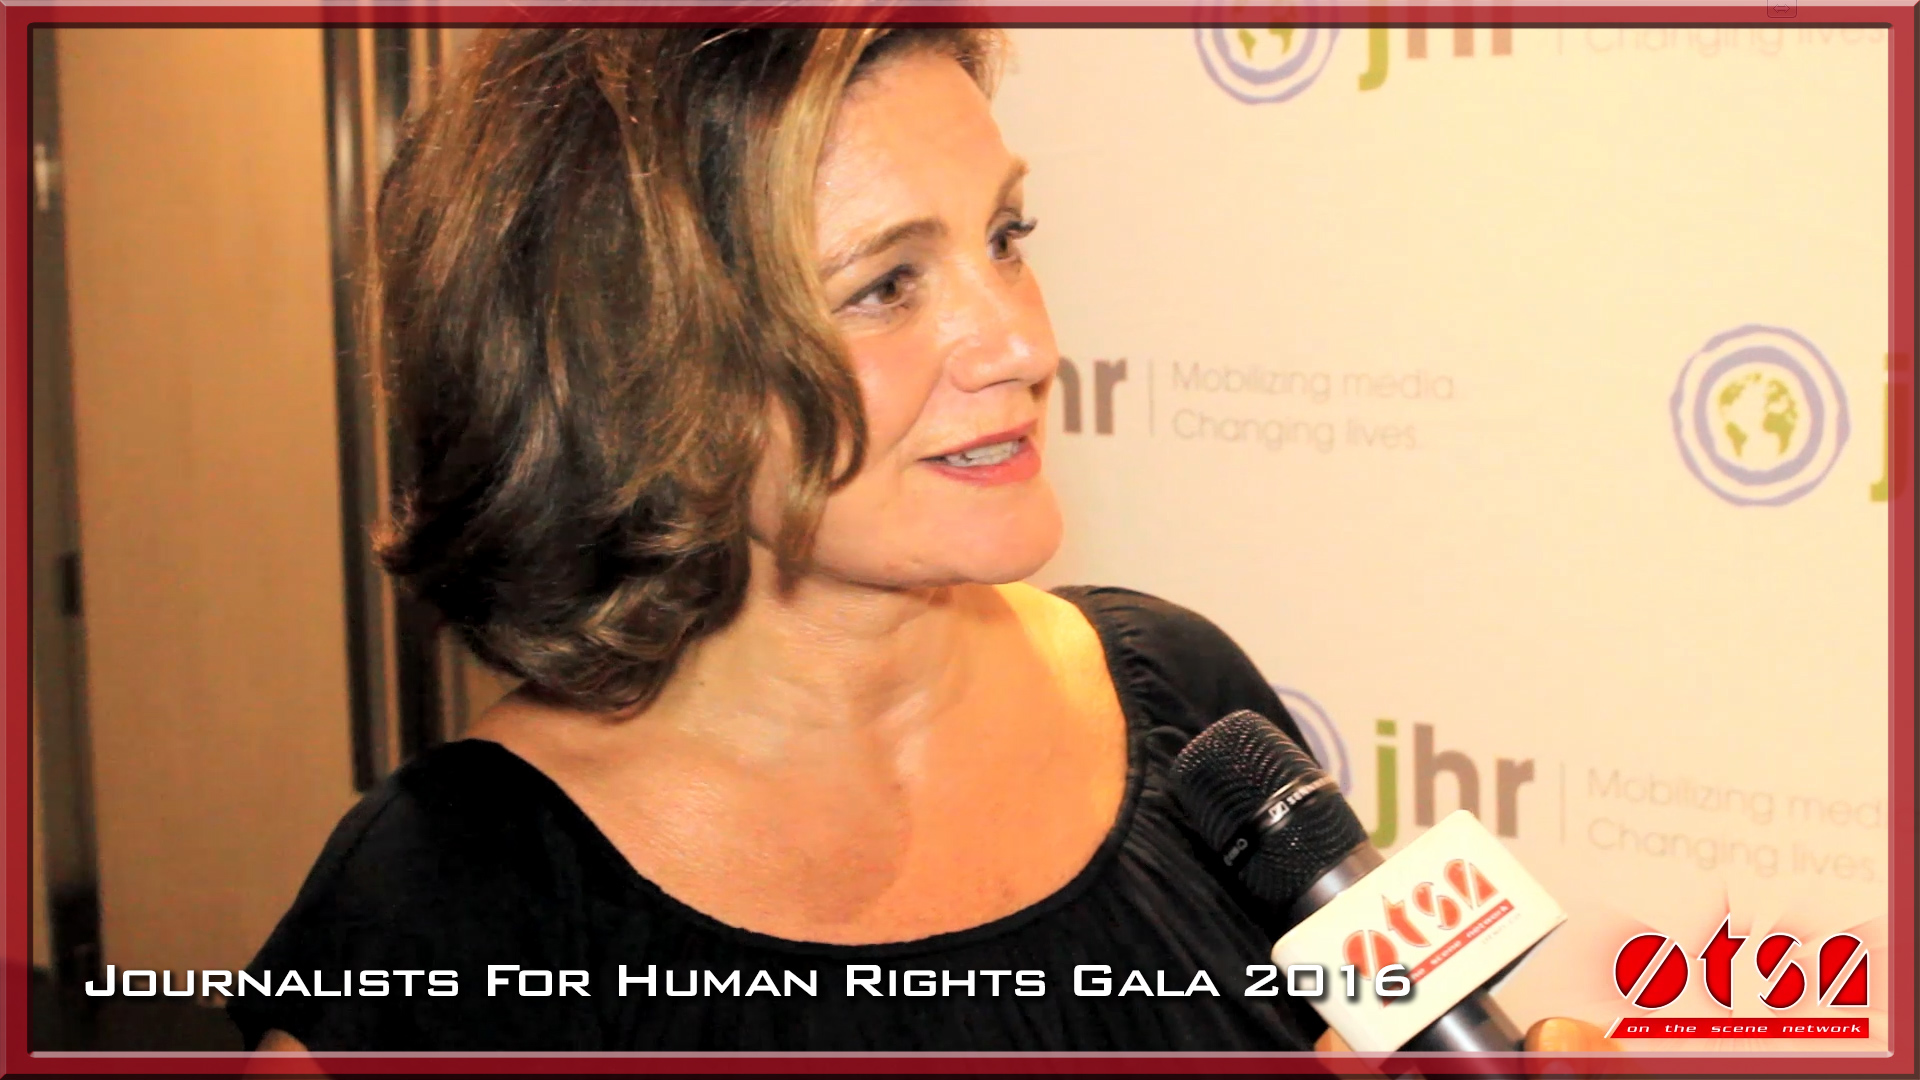 Night for Rights Gala 2016 in support of JHR